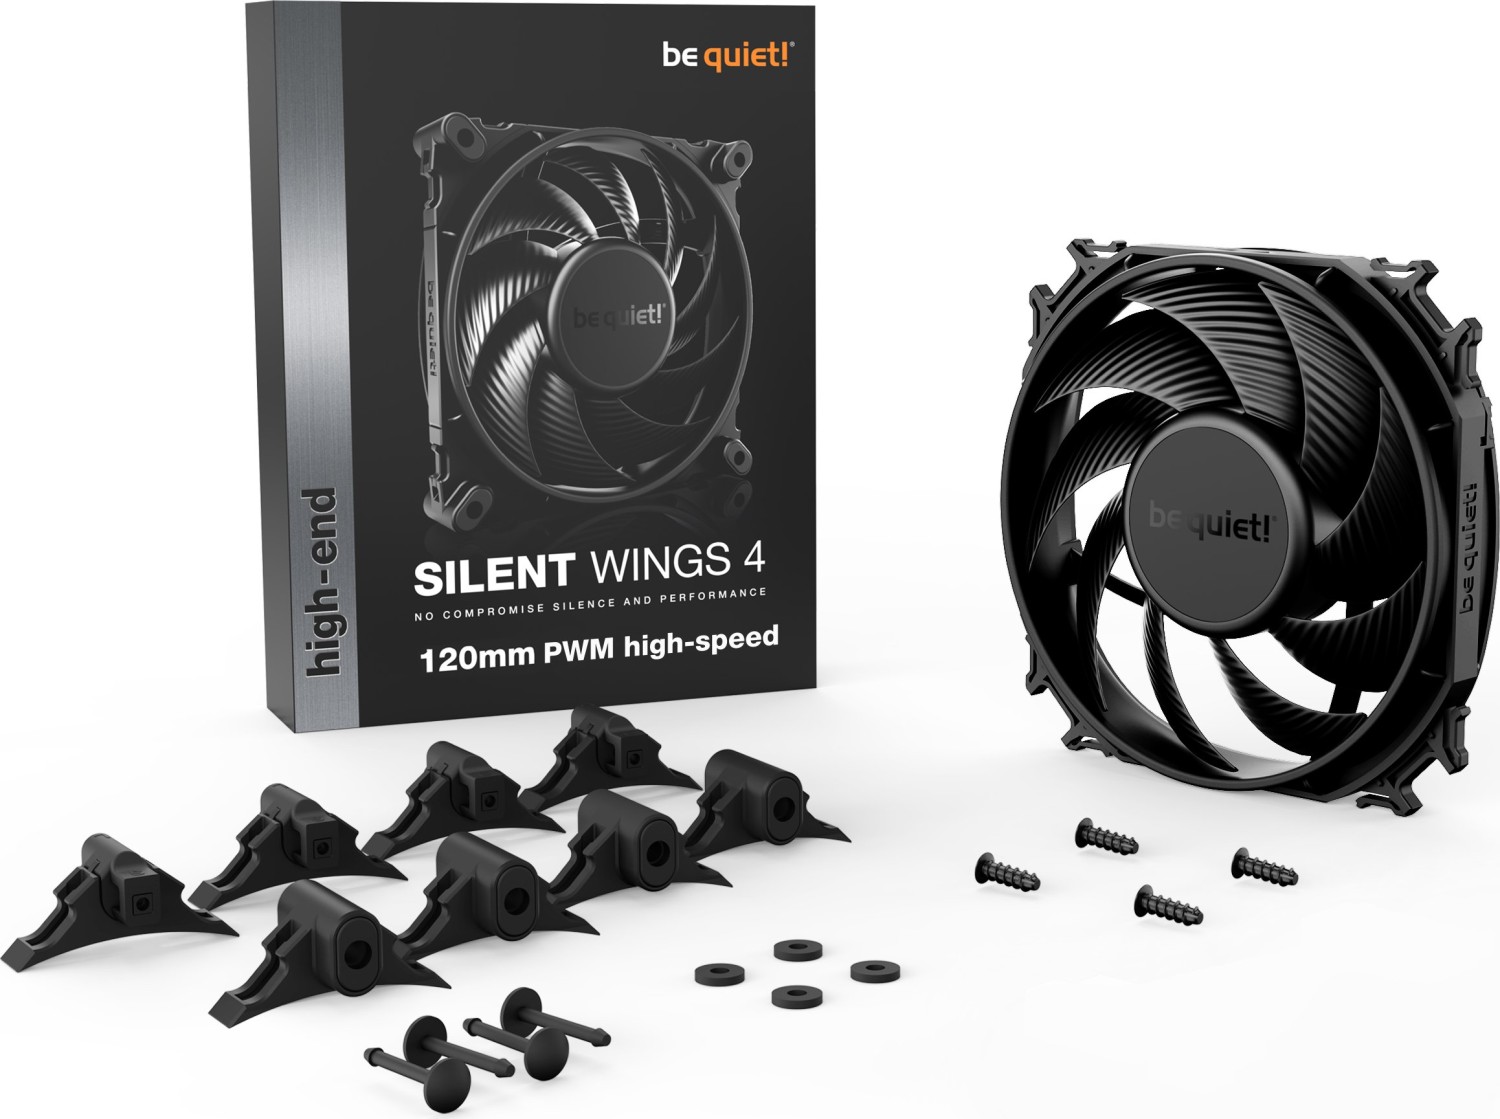 120mm, be quiet! Silent Wings 4 PWM High-Speed